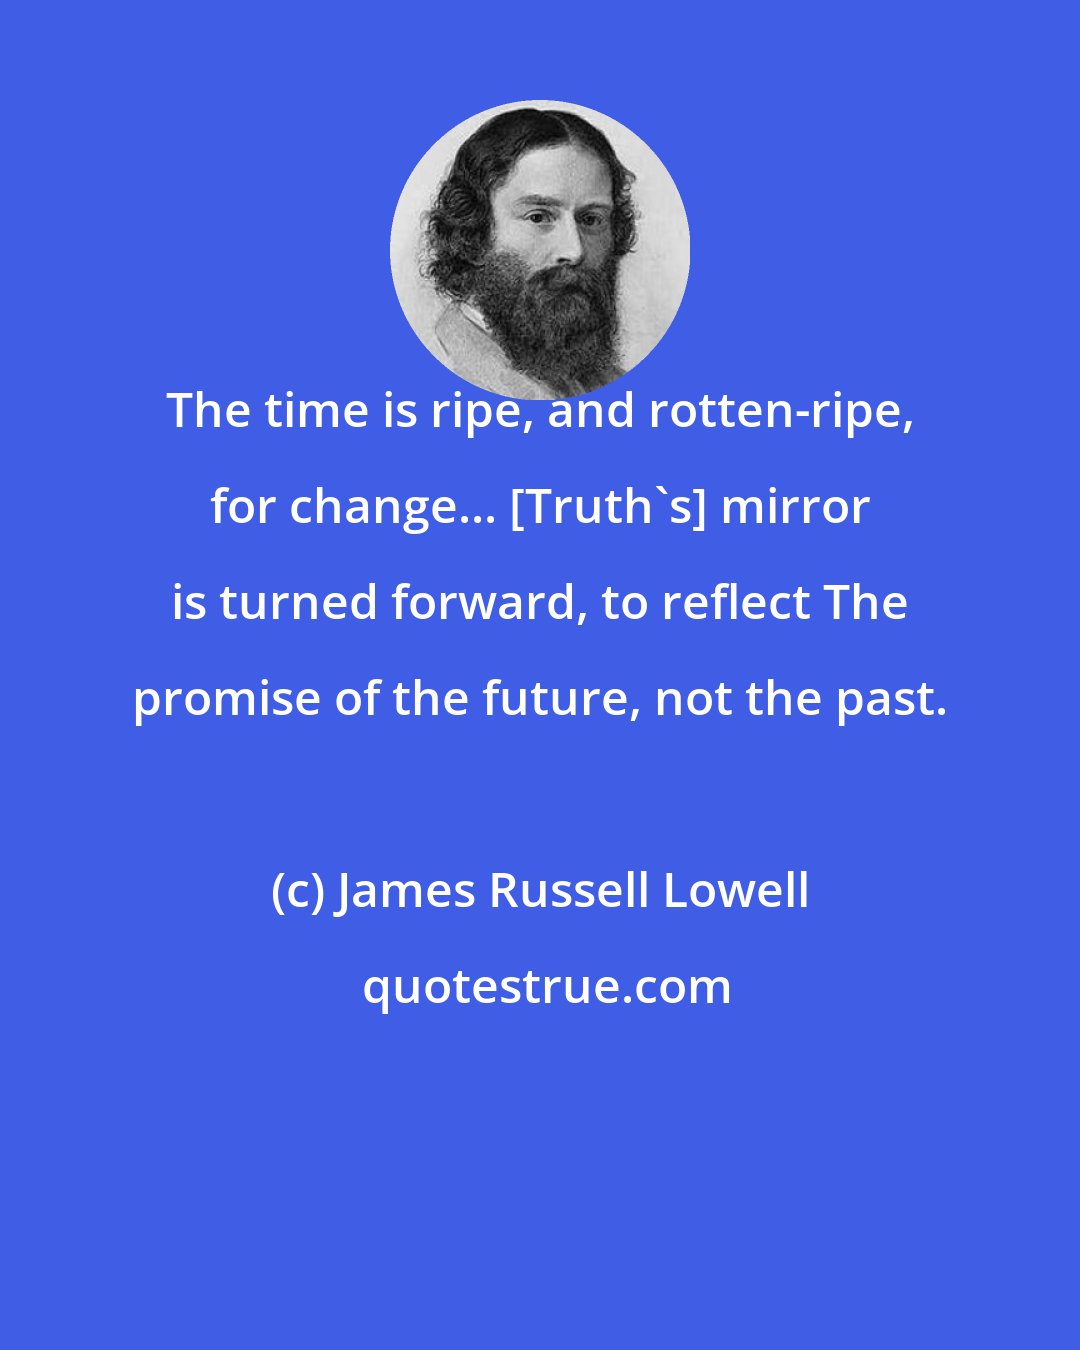 James Russell Lowell: The time is ripe, and rotten-ripe, for change... [Truth's] mirror is turned forward, to reflect The promise of the future, not the past.